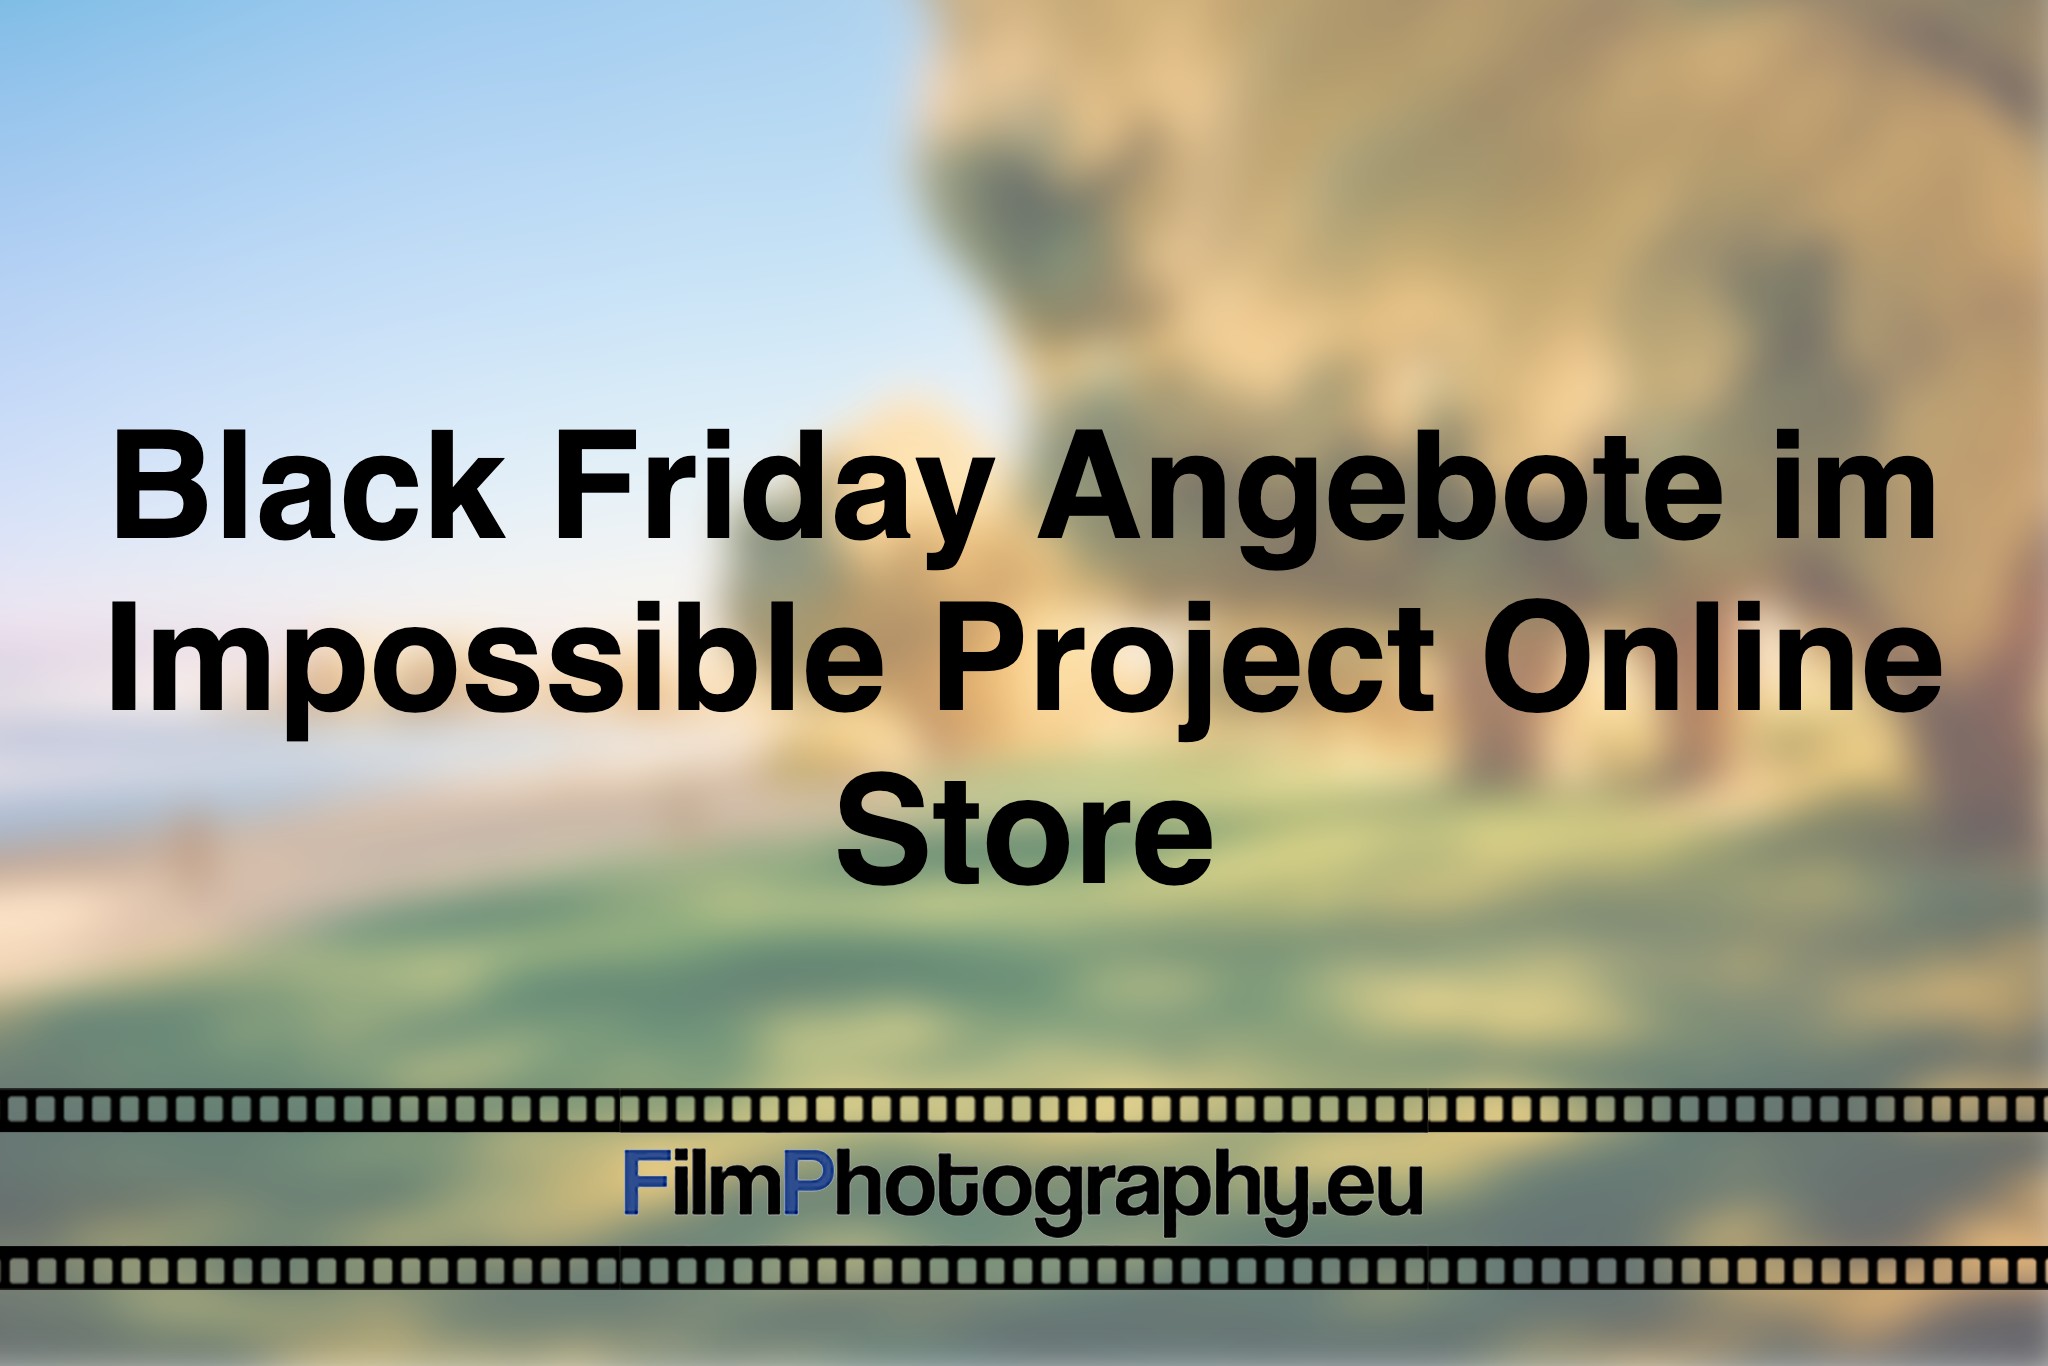 black-friday-angebote-im-impossible-project-online-store-photo-bnv